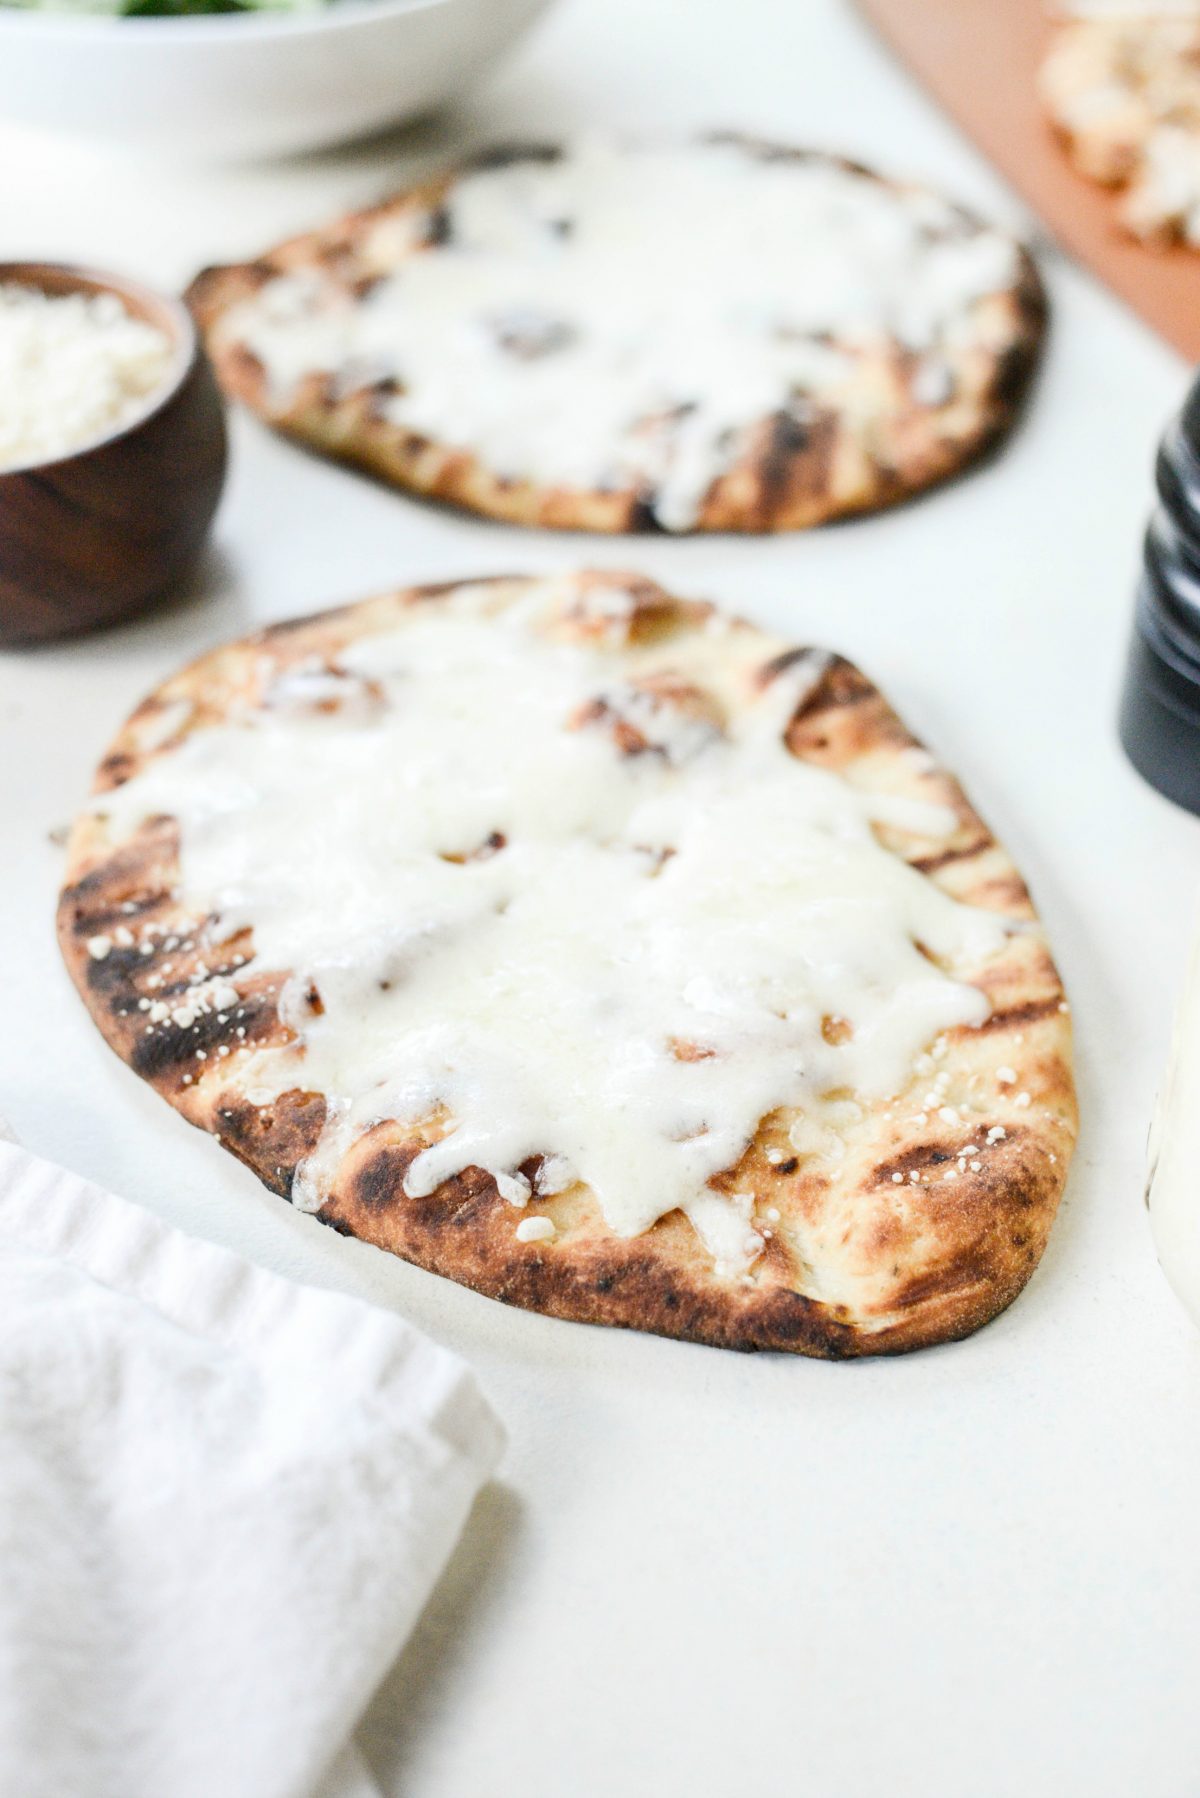 grilled naan with melted cheese